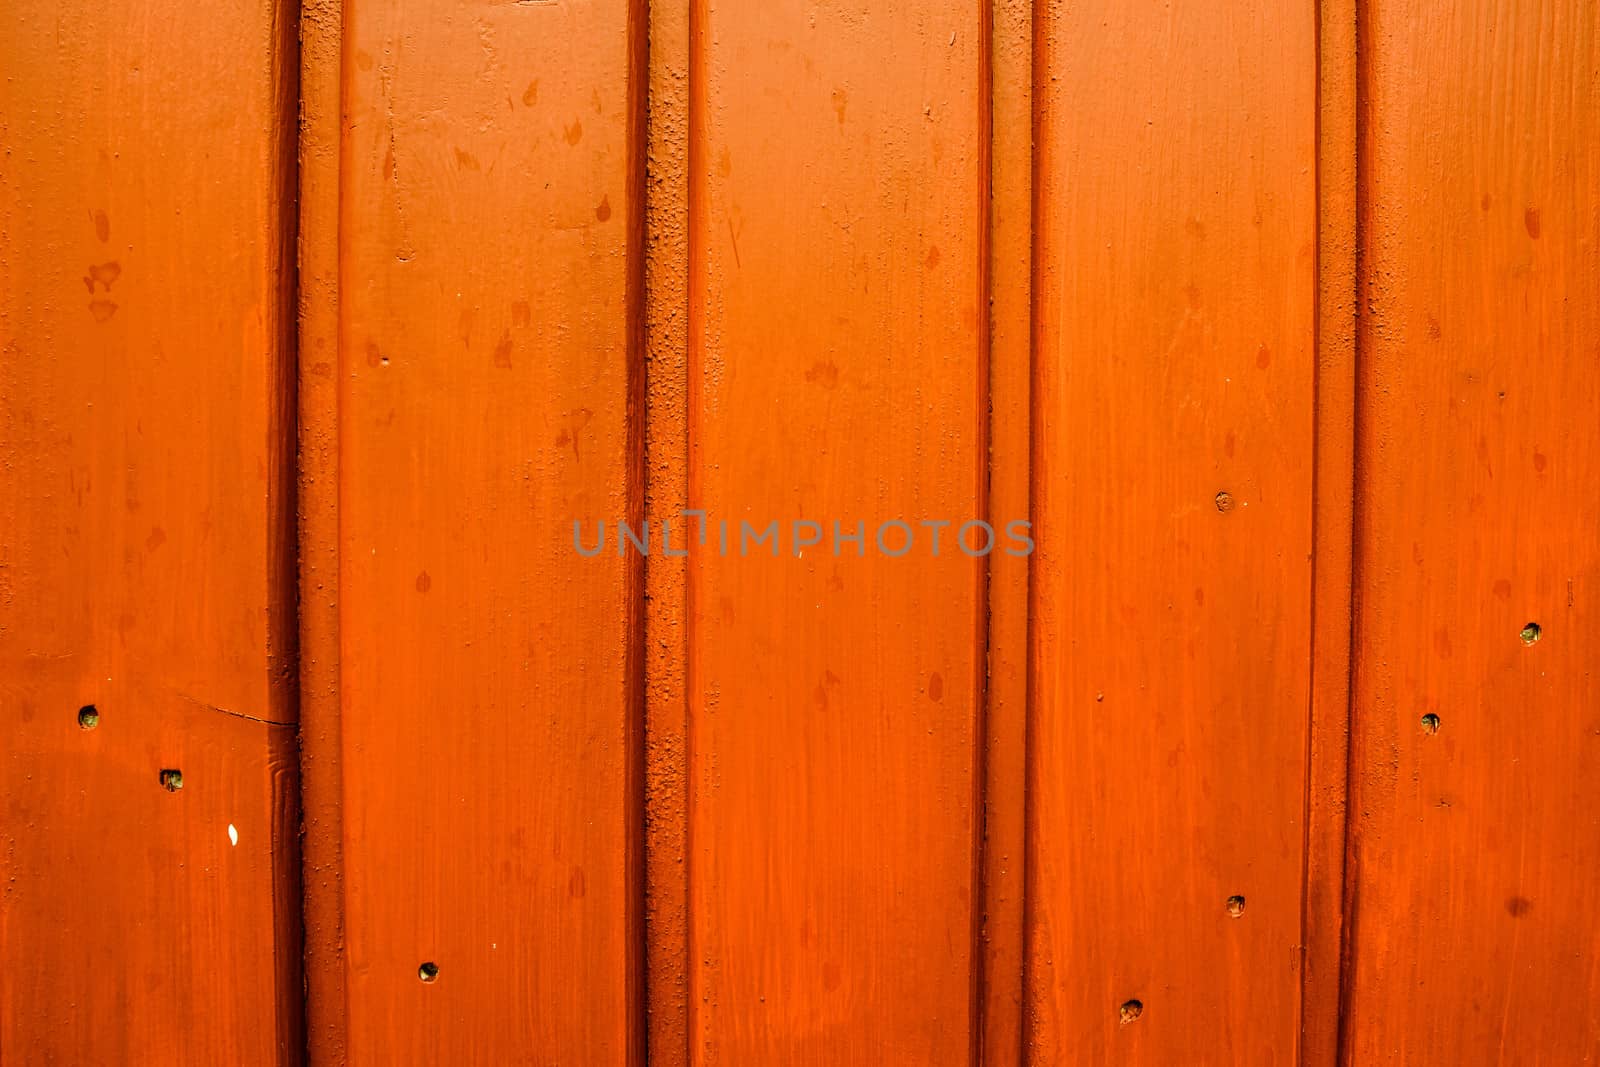 Grunge wooden wall in strong color